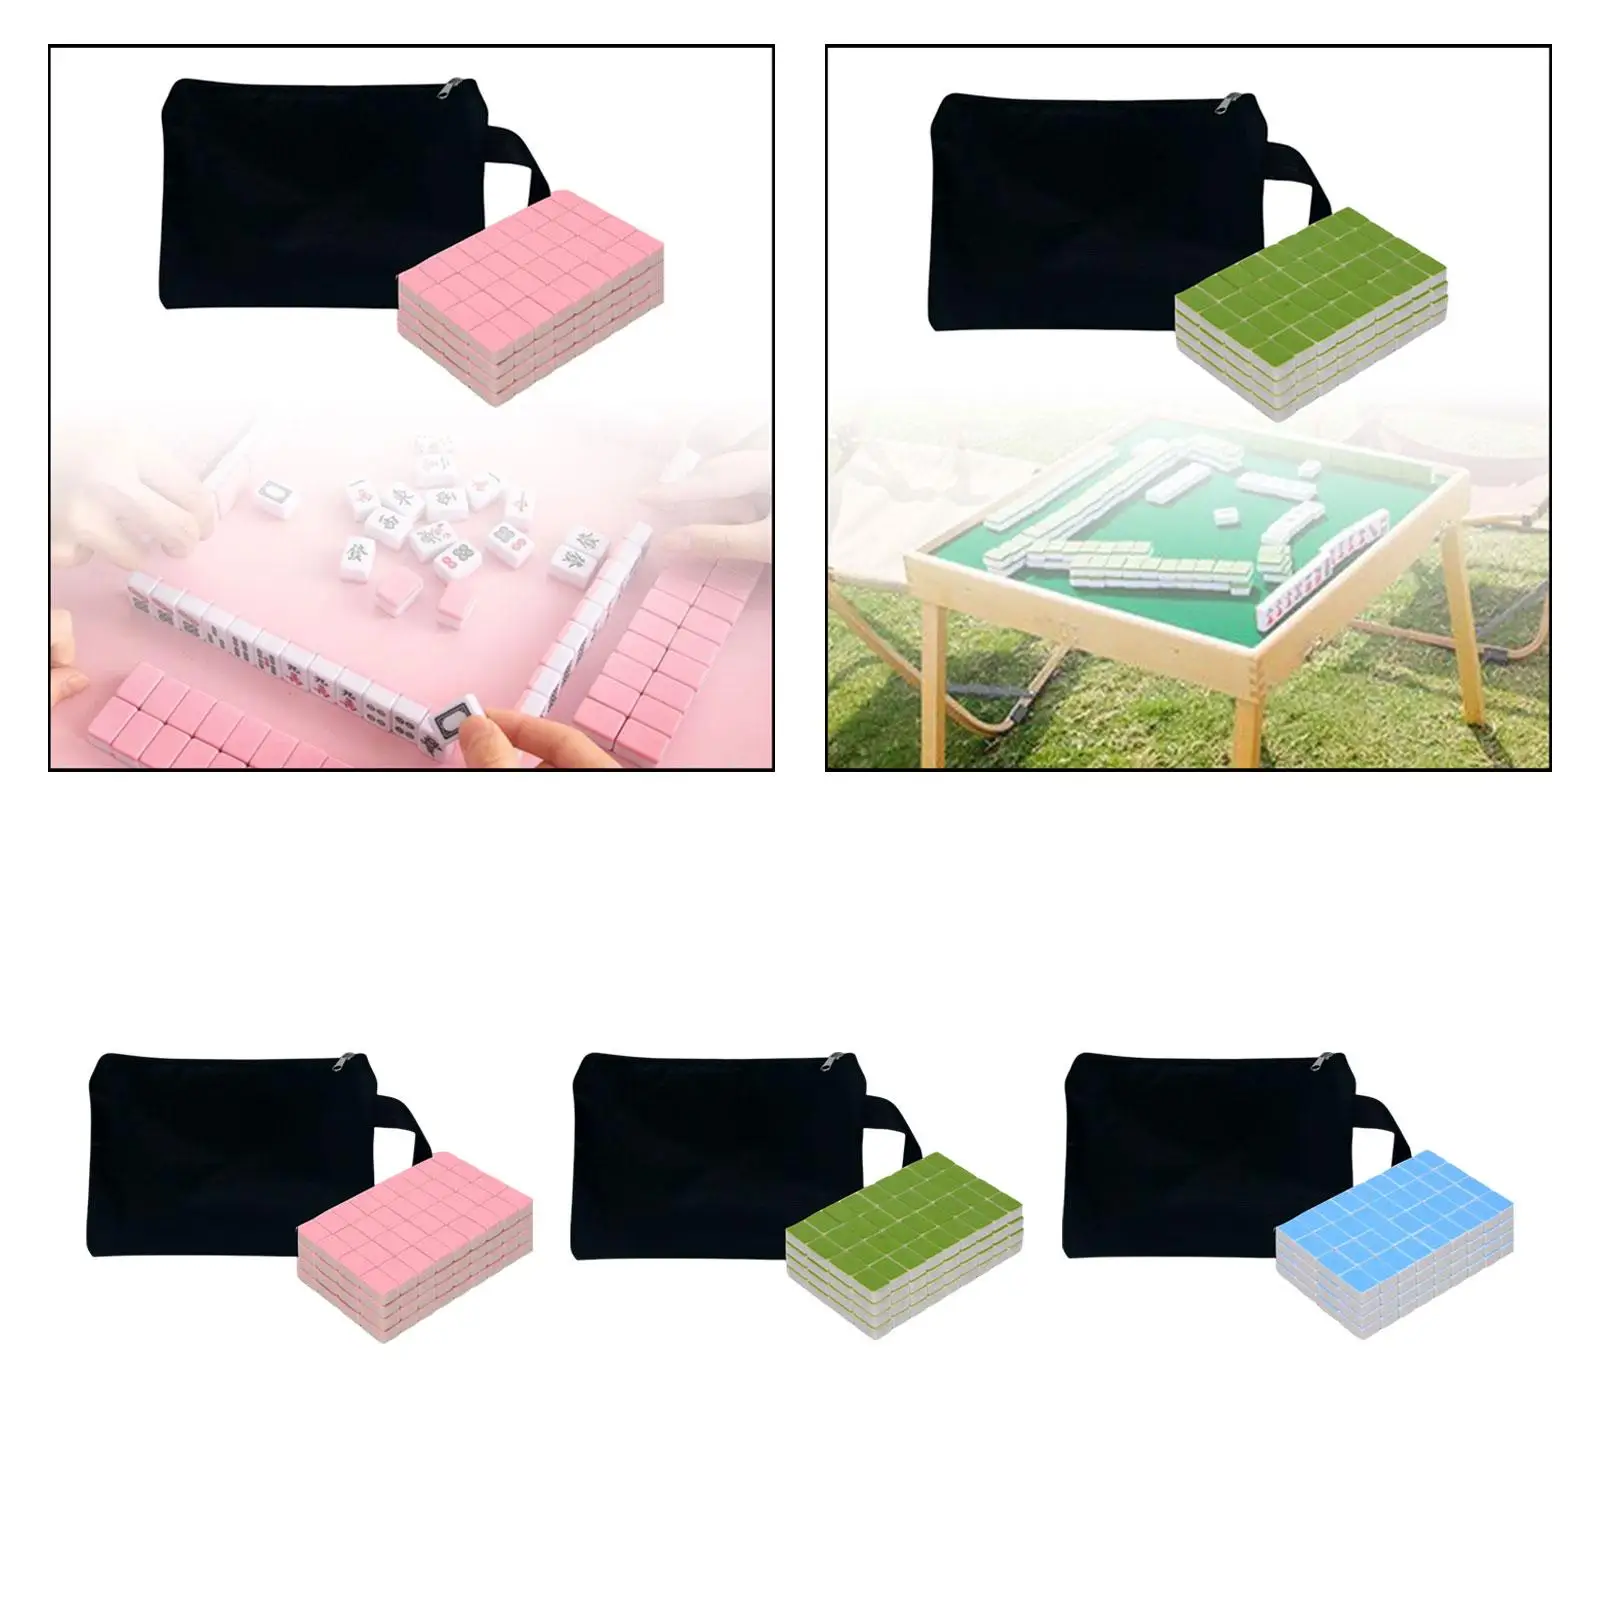 Mini Mahjong Set with Storage board Game Family Leisure Time Travel Mini Mahjong for Gathering Home Outdoor Dorm Festival